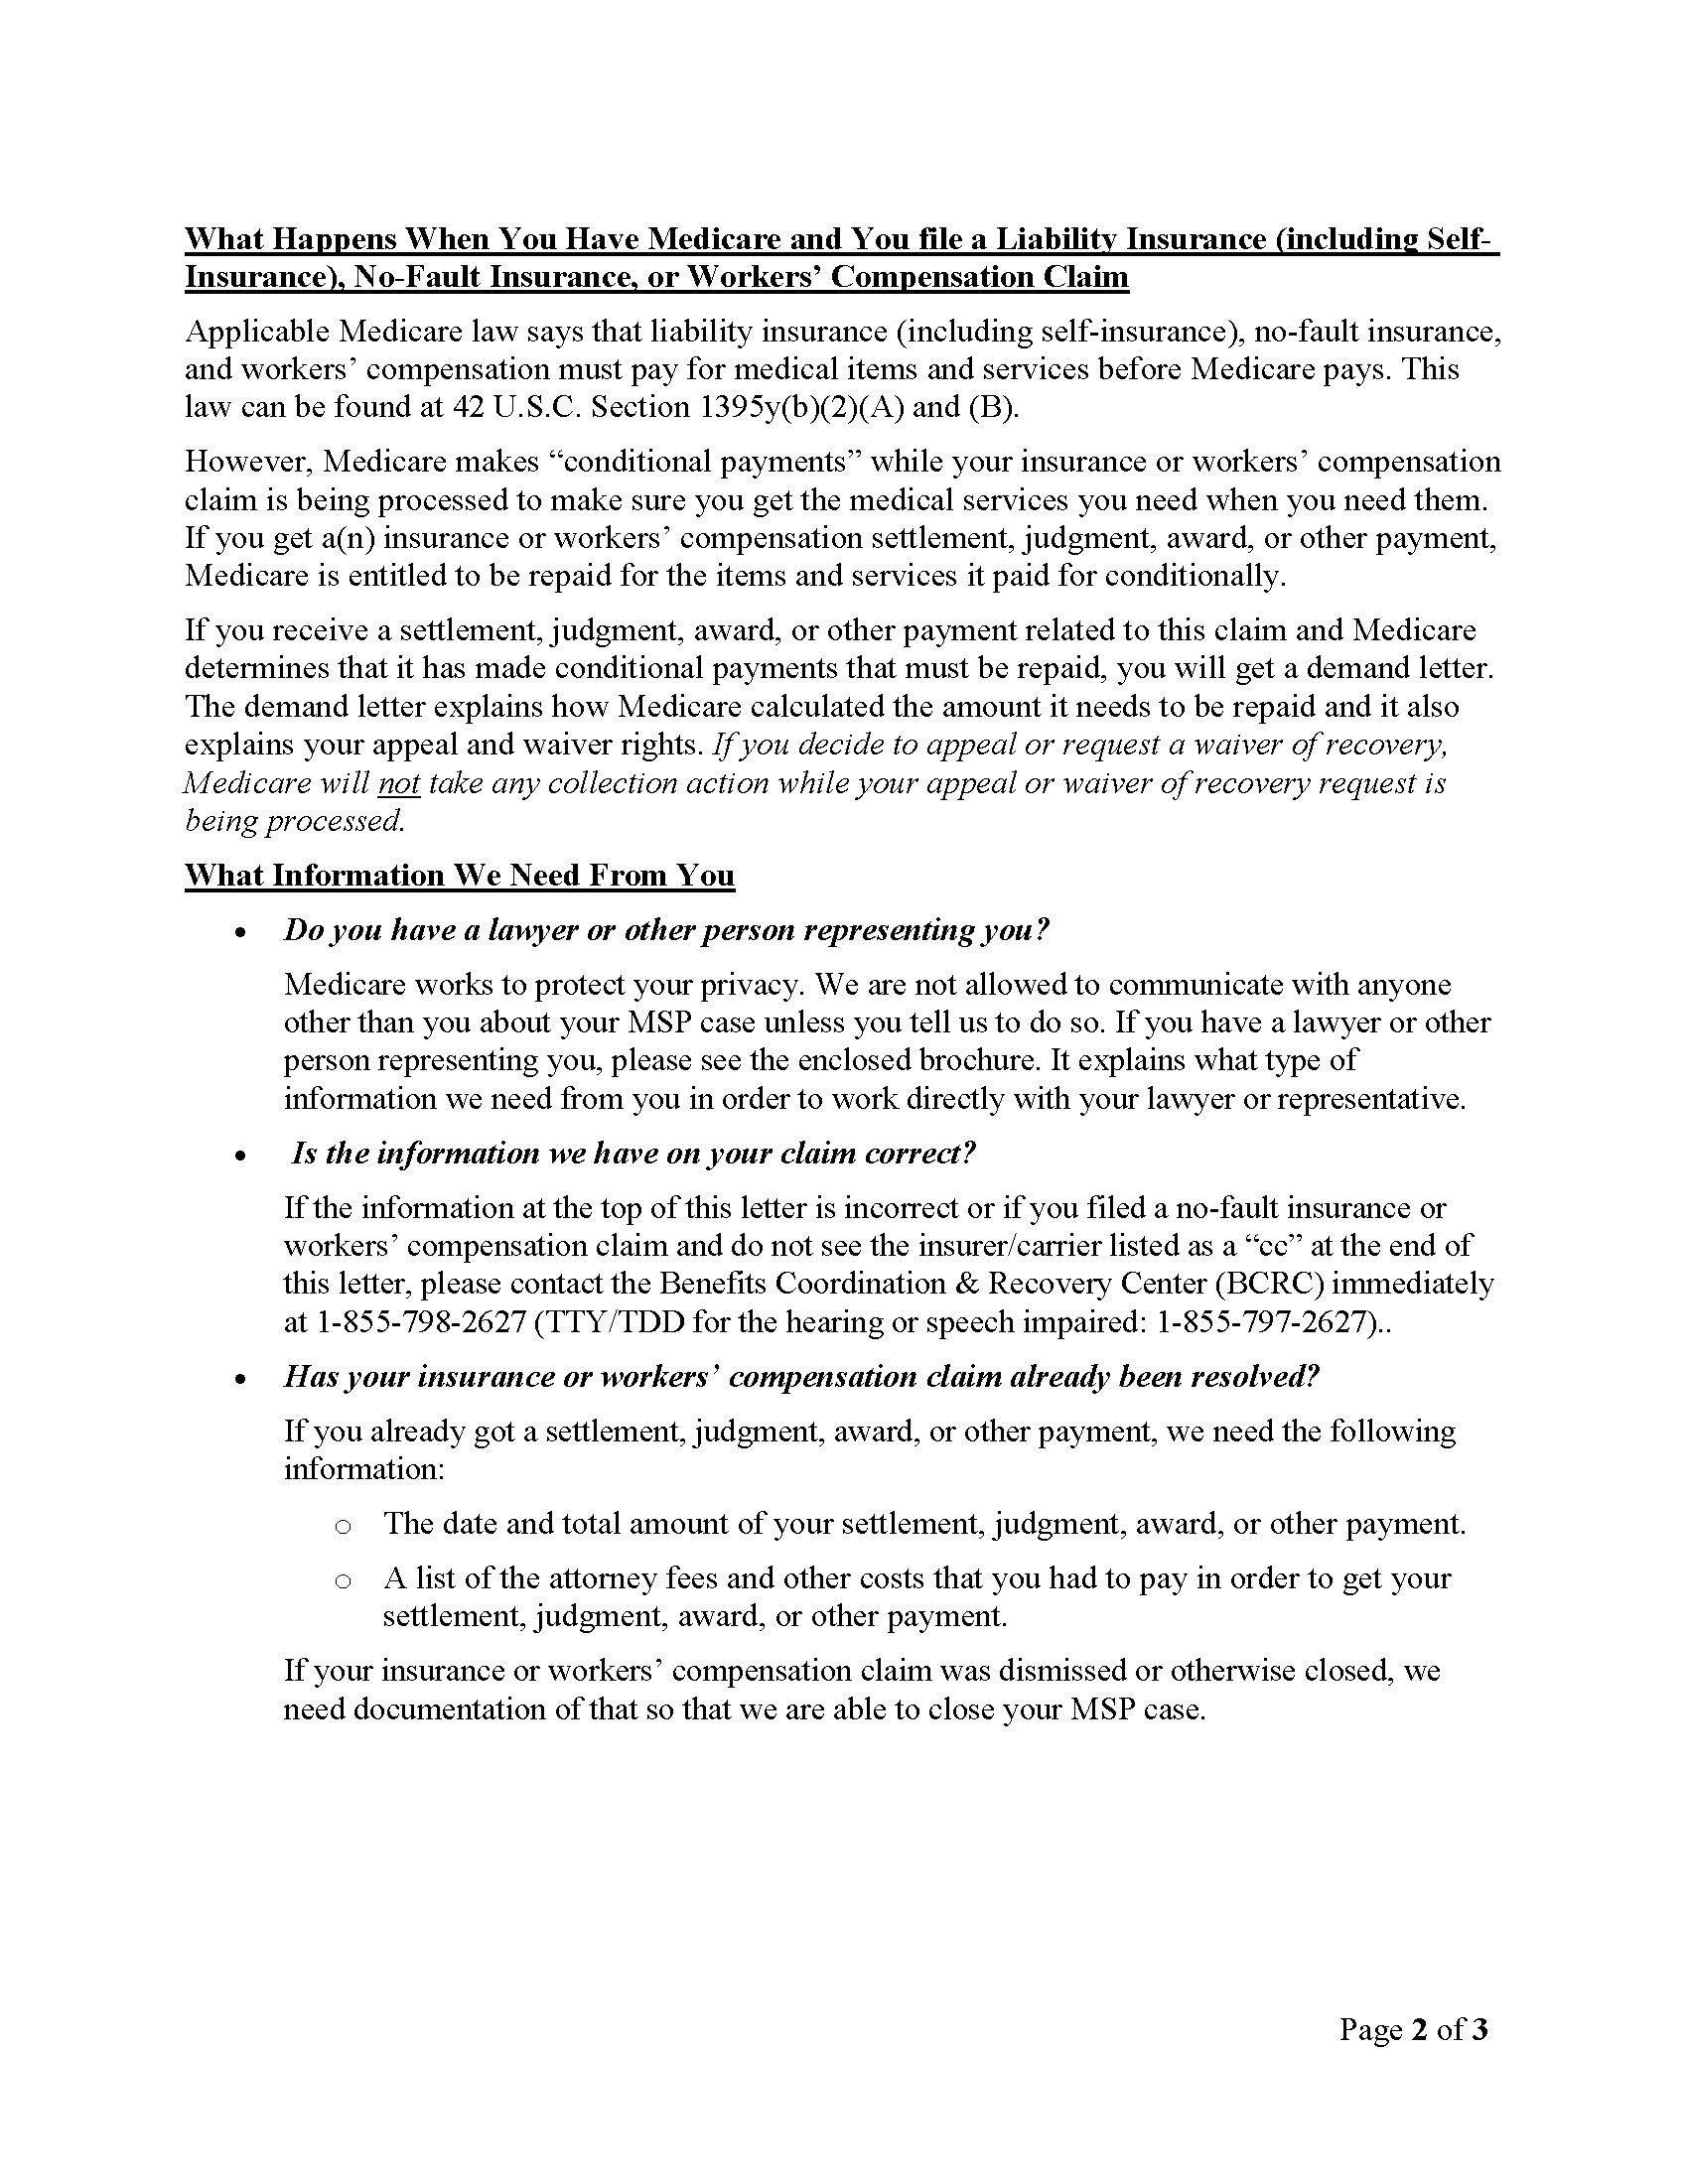 Rights and Responsibilities, Page 2